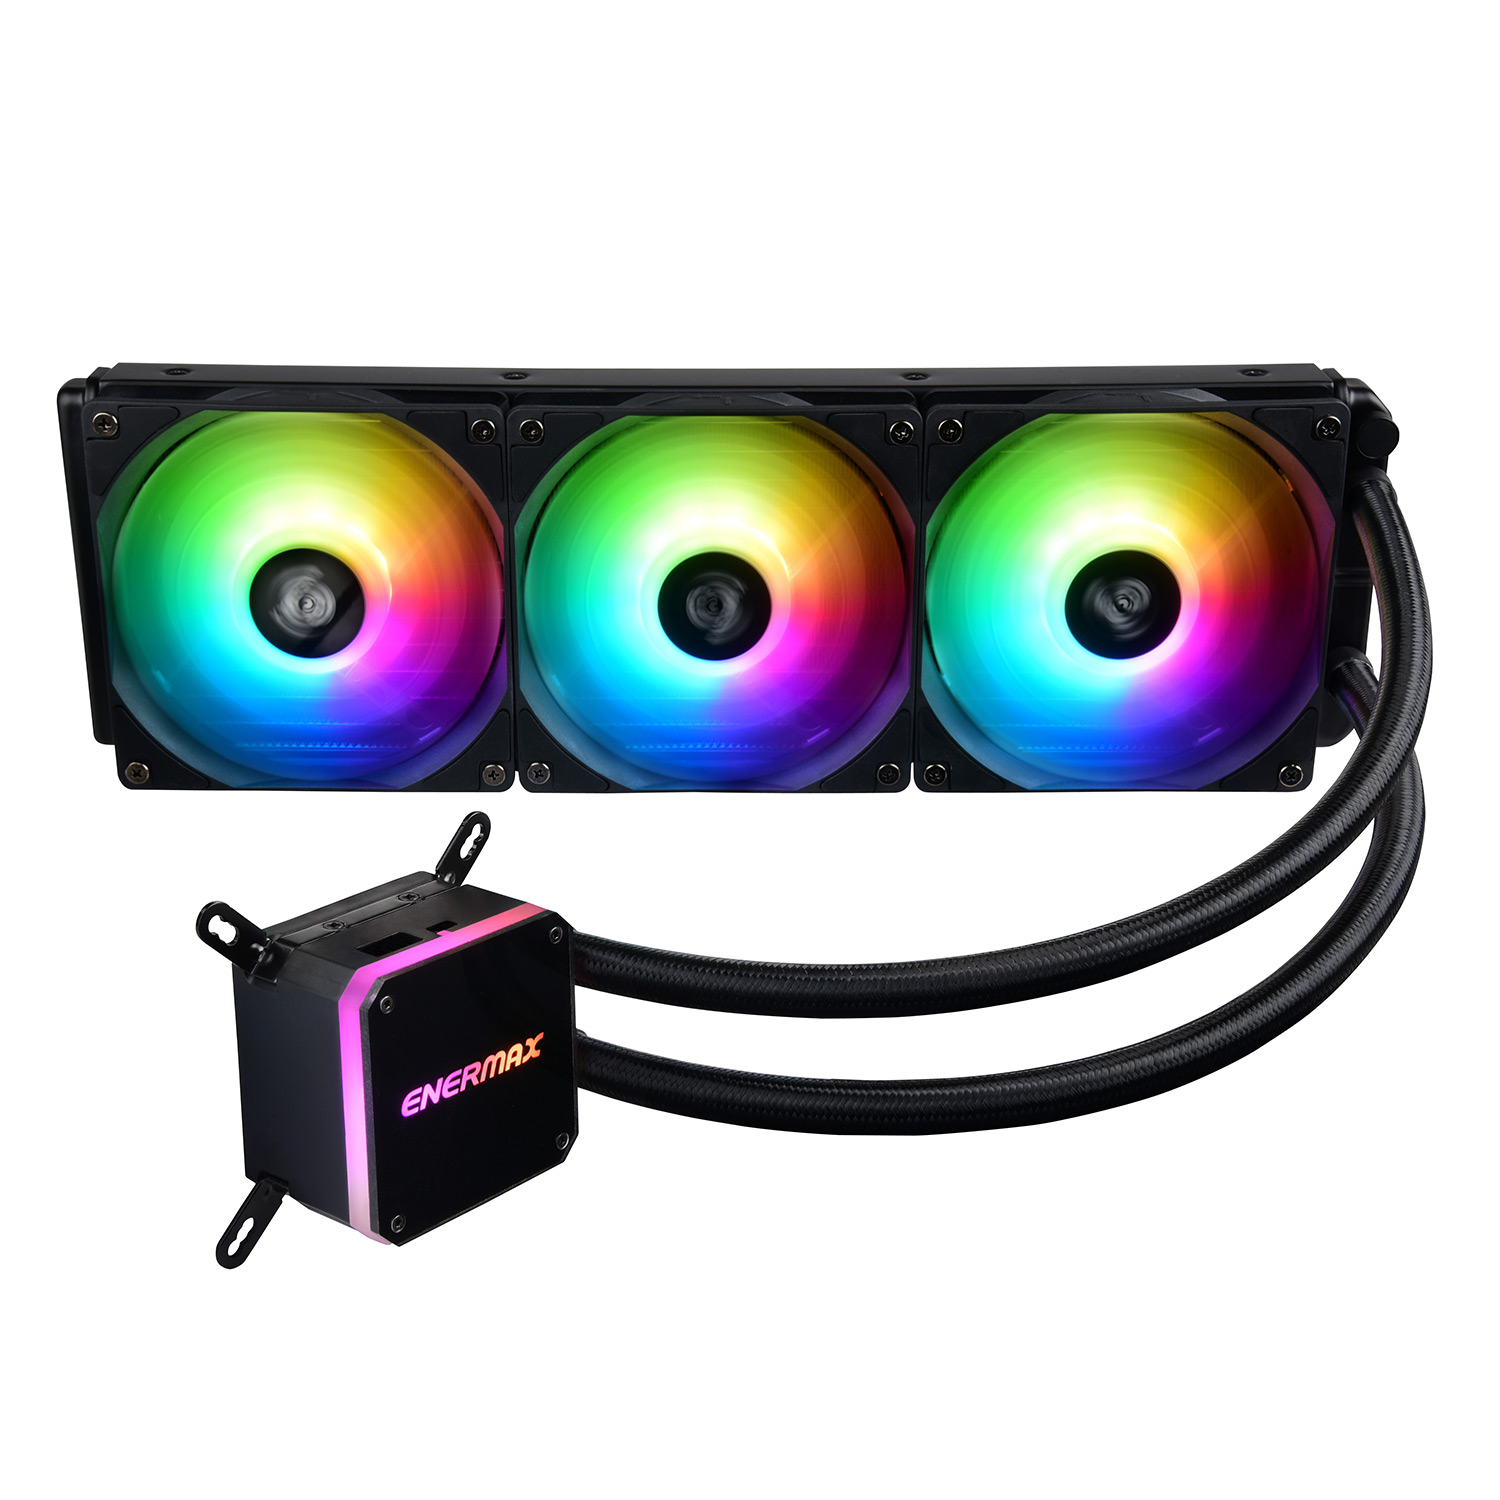 Enermax AMD Upgrade Kit For AM5/AM4/AM3